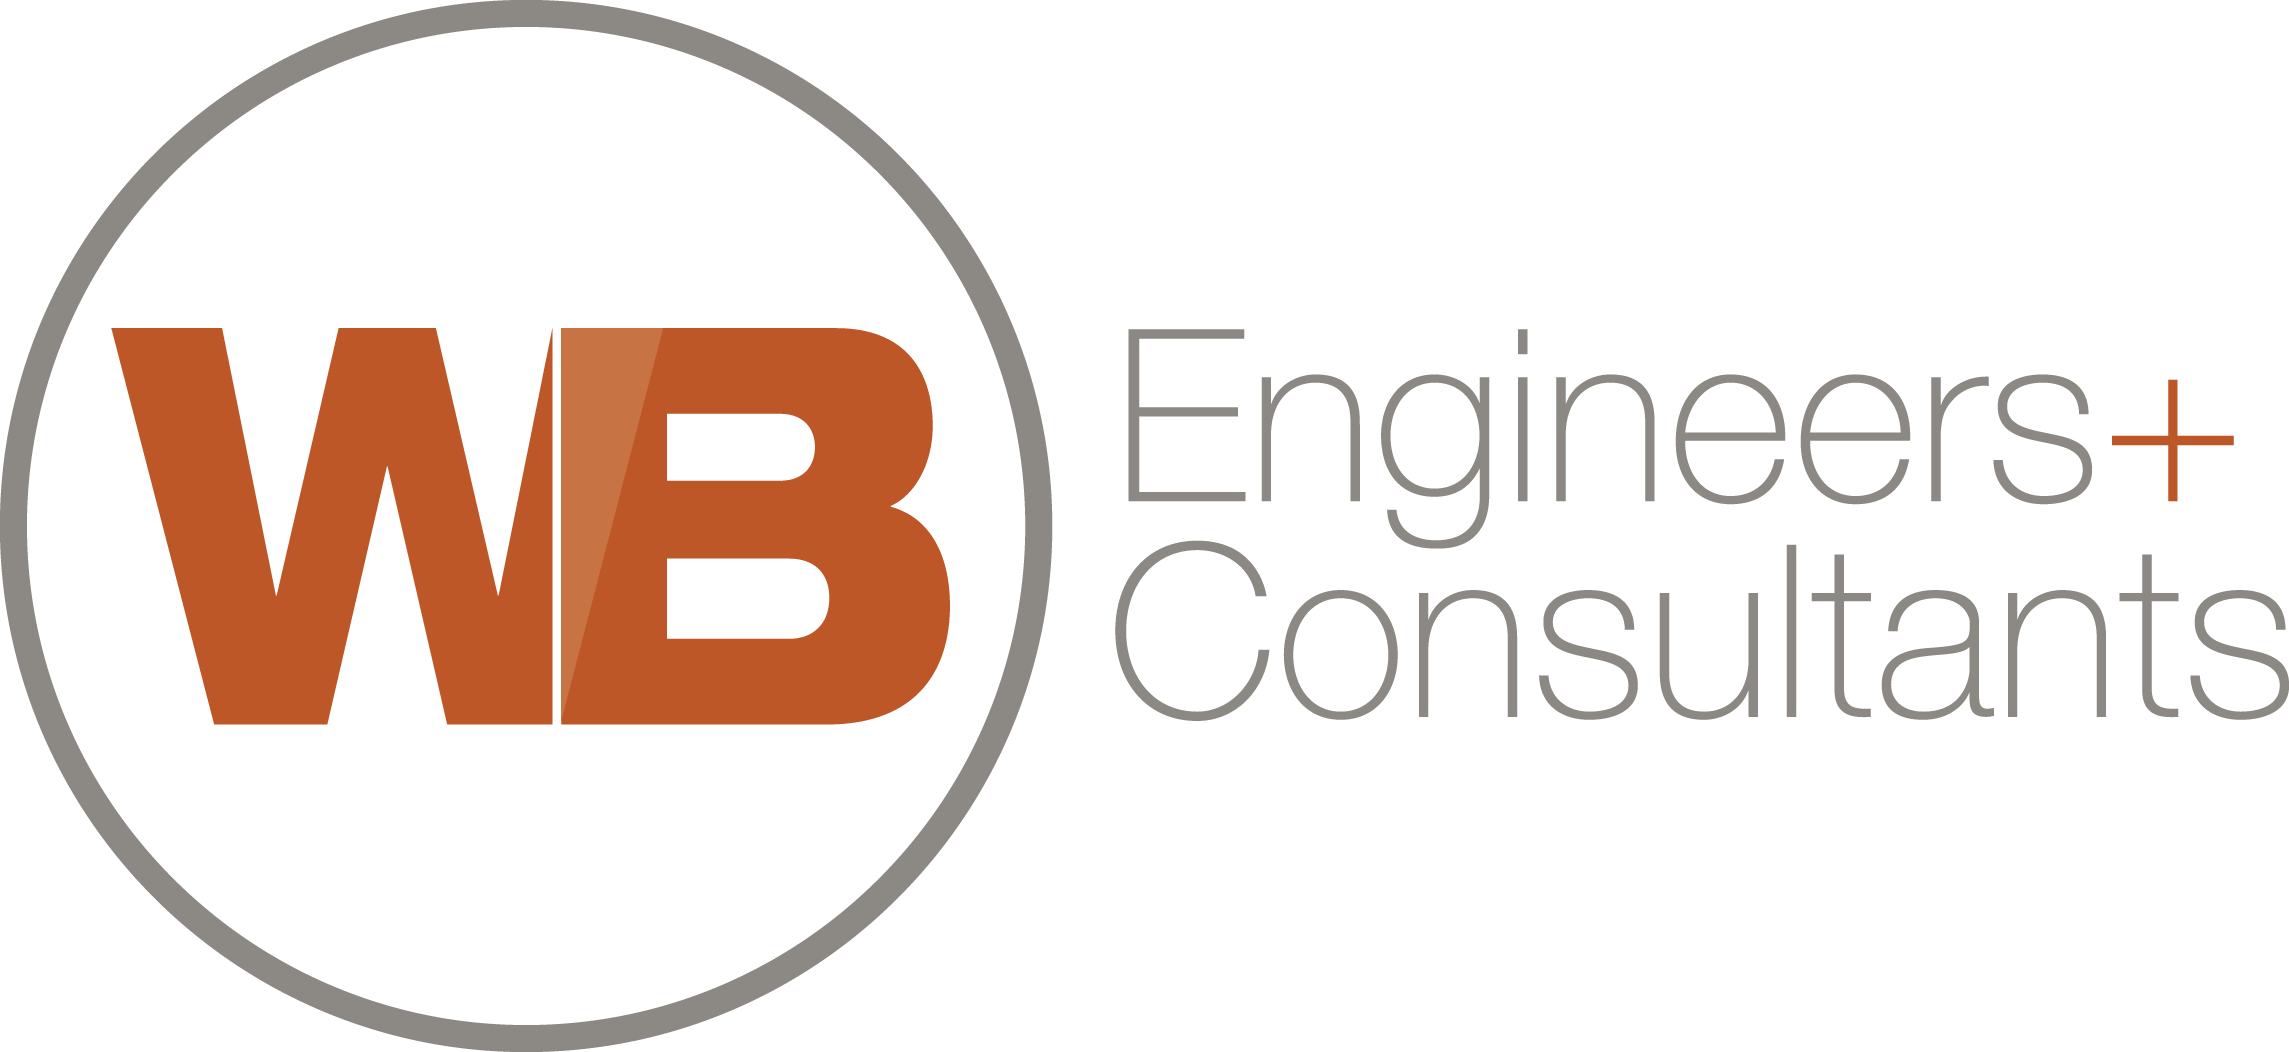 WB Engineers+Consultants Color Logo_8x11 Coated (003).png